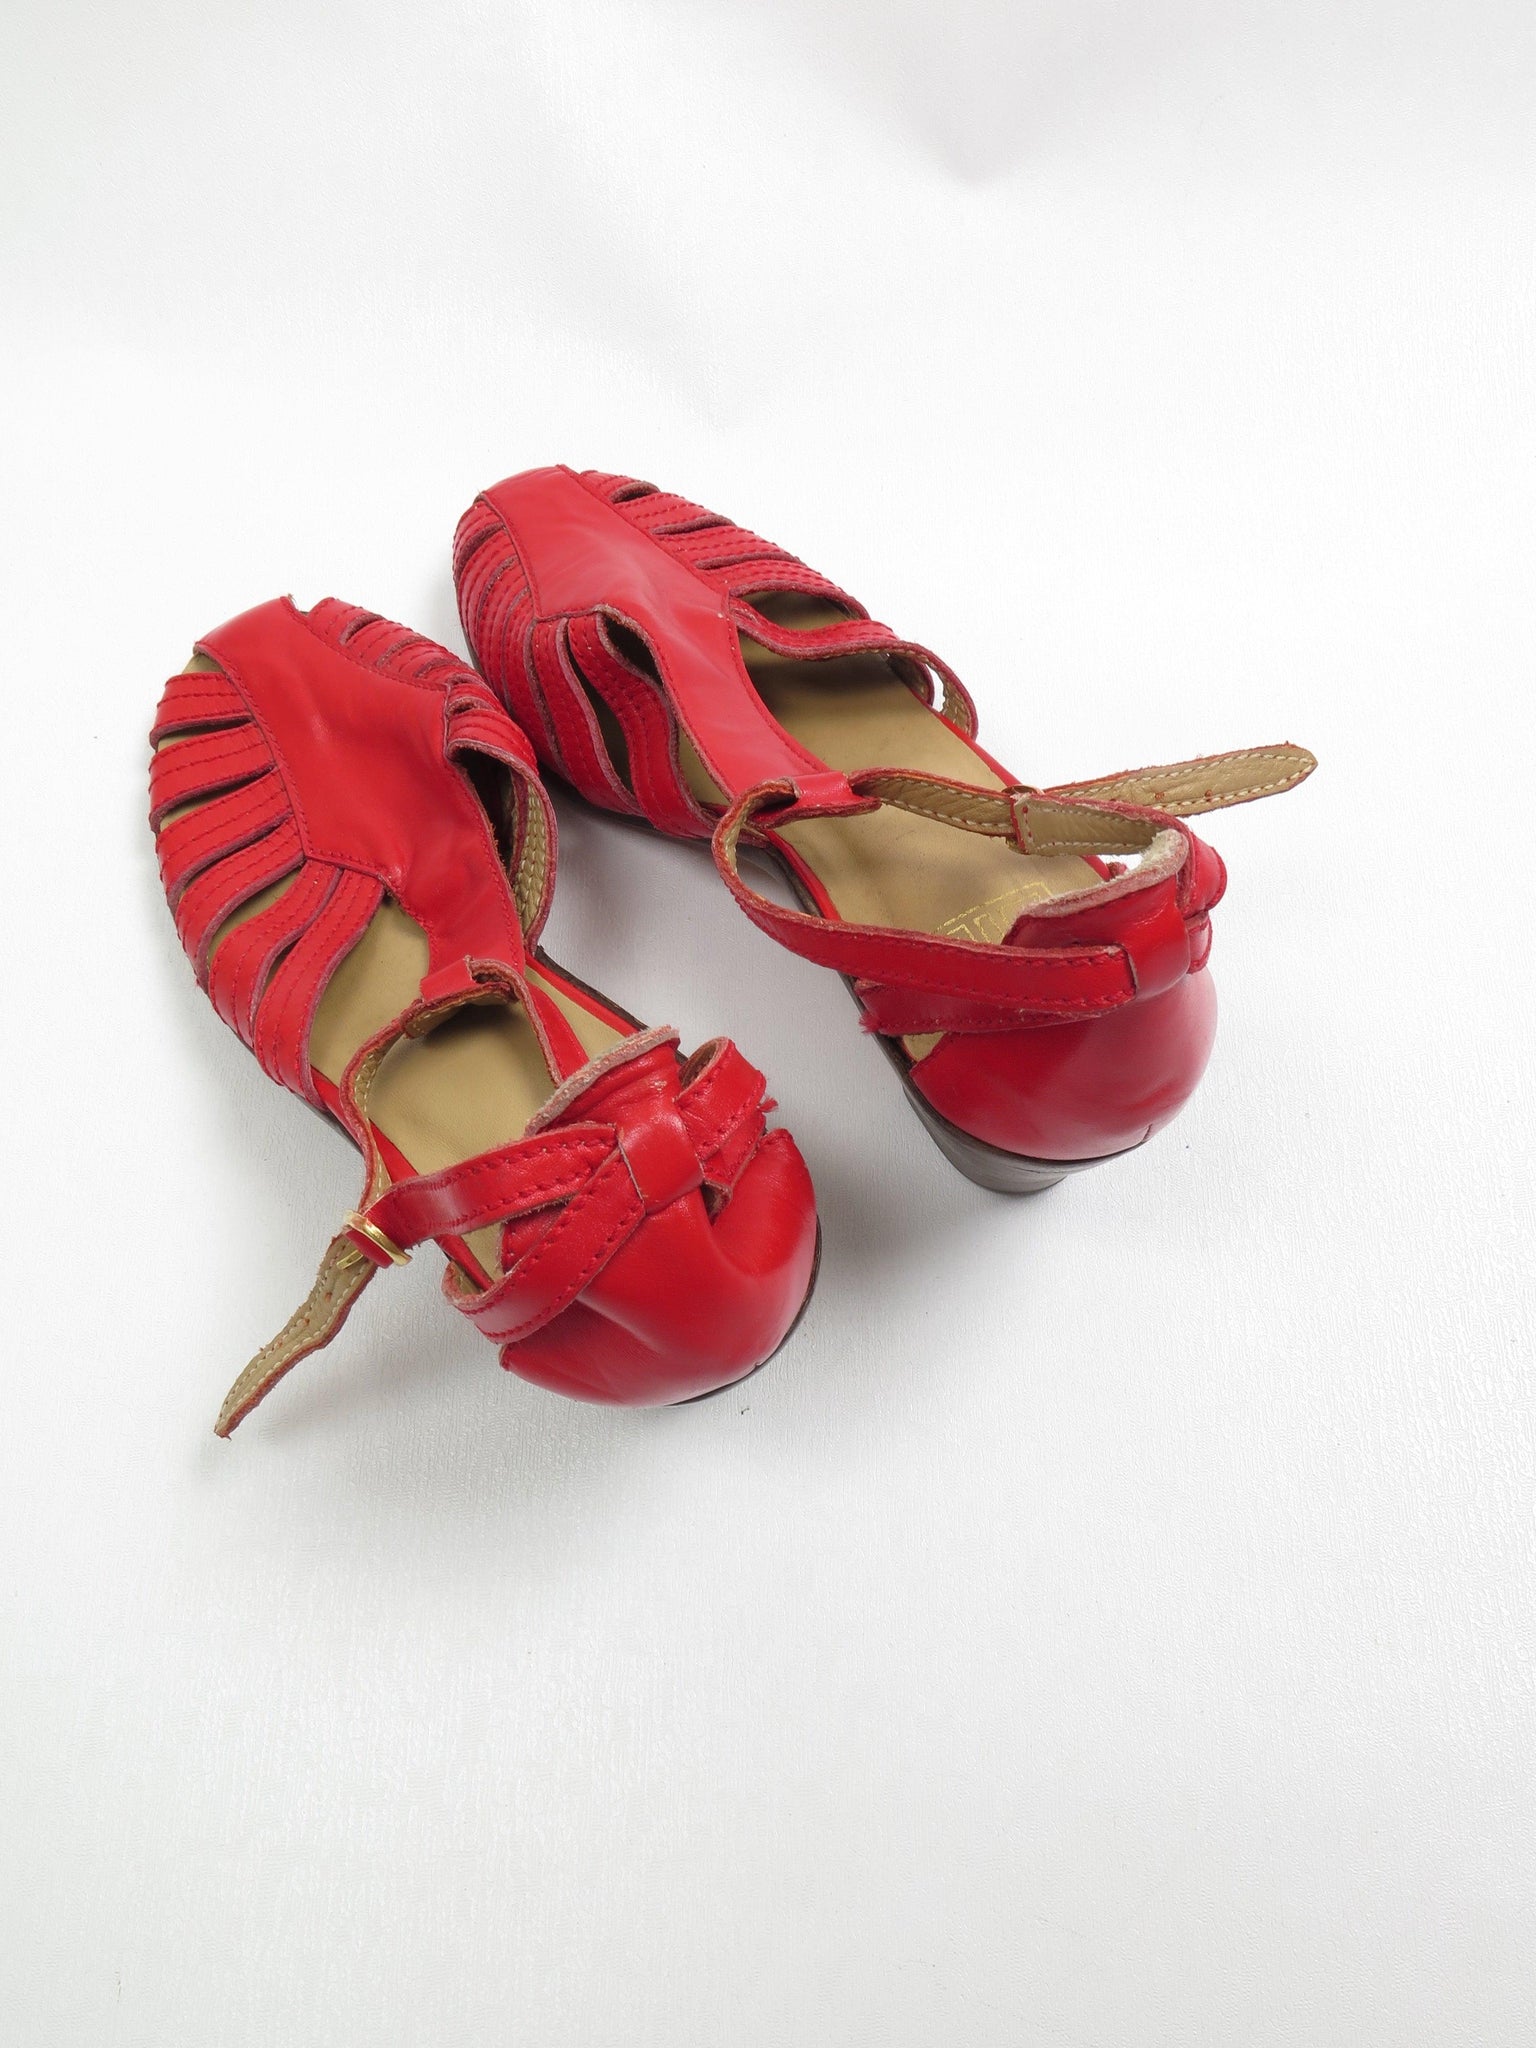 Red Vintage Sandals With Small Heels 39/6 UK - The Harlequin